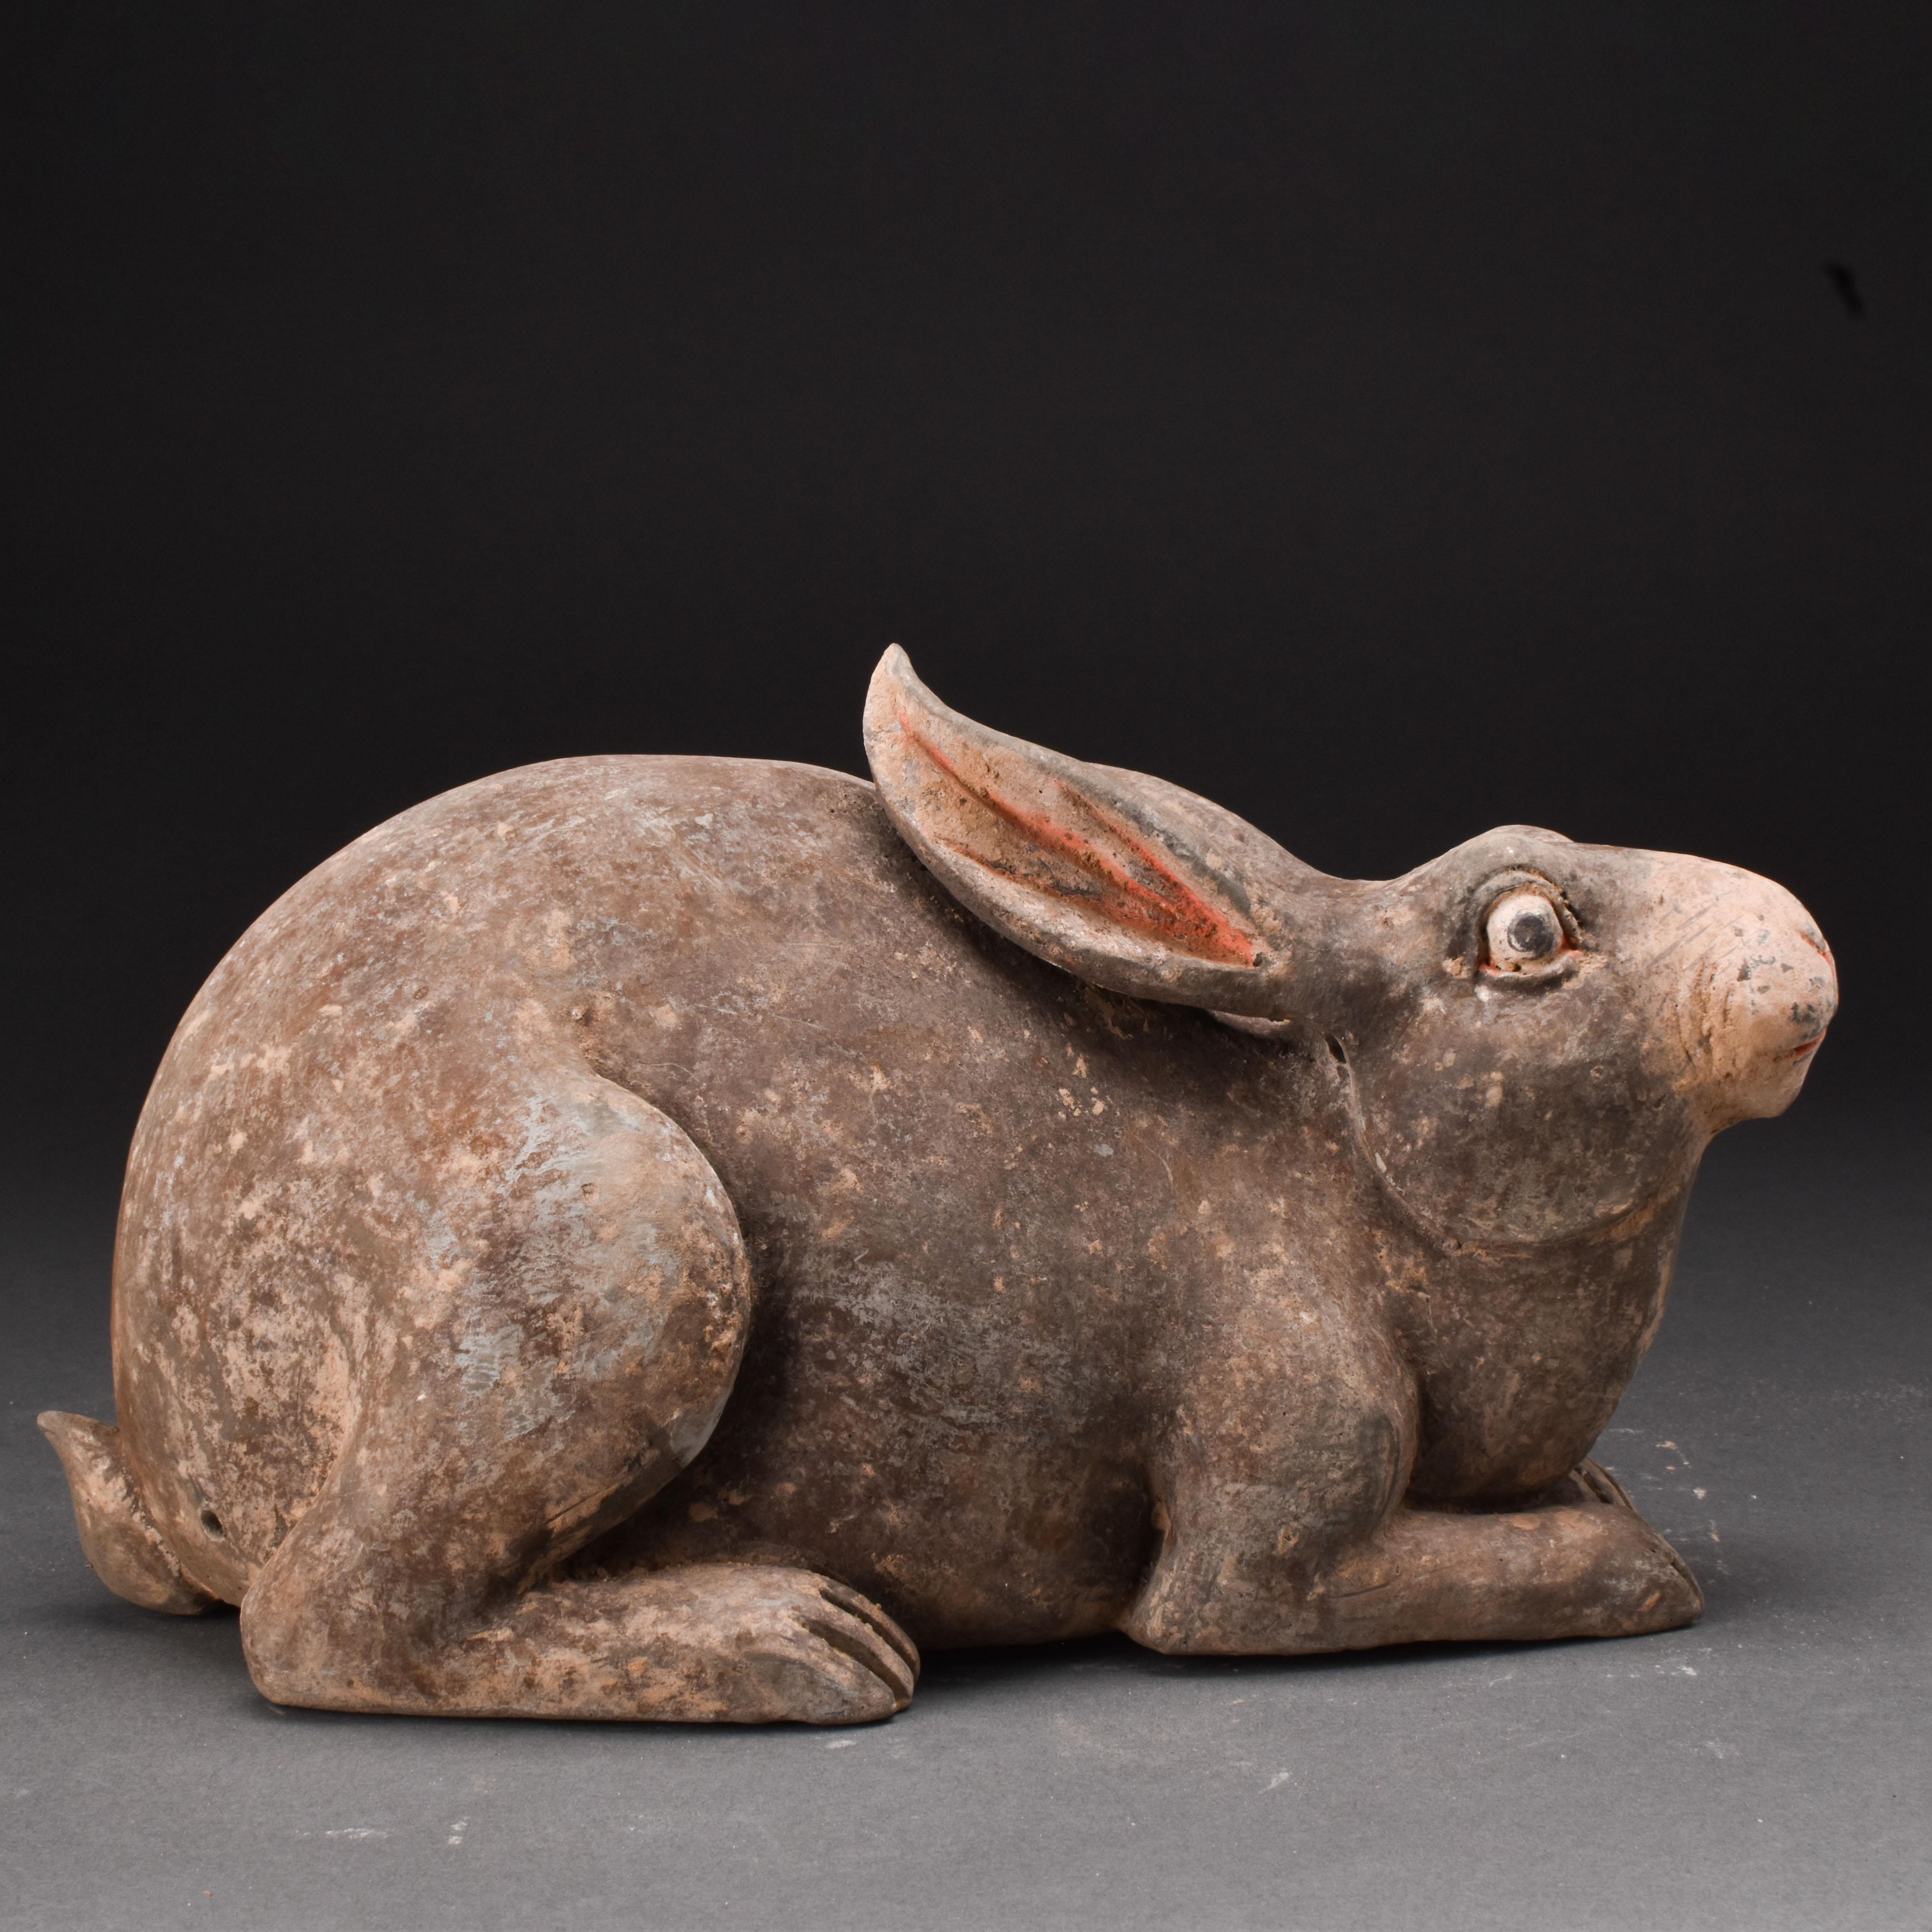 A large terracotta rabbit that is depicted in an extremely naturalistic manner, characteristic of Han Dynasty artistic practice. It is depicted in a recumbent pose, ears bent backward and head forward. The eyes, ears, and mouth are distinguished